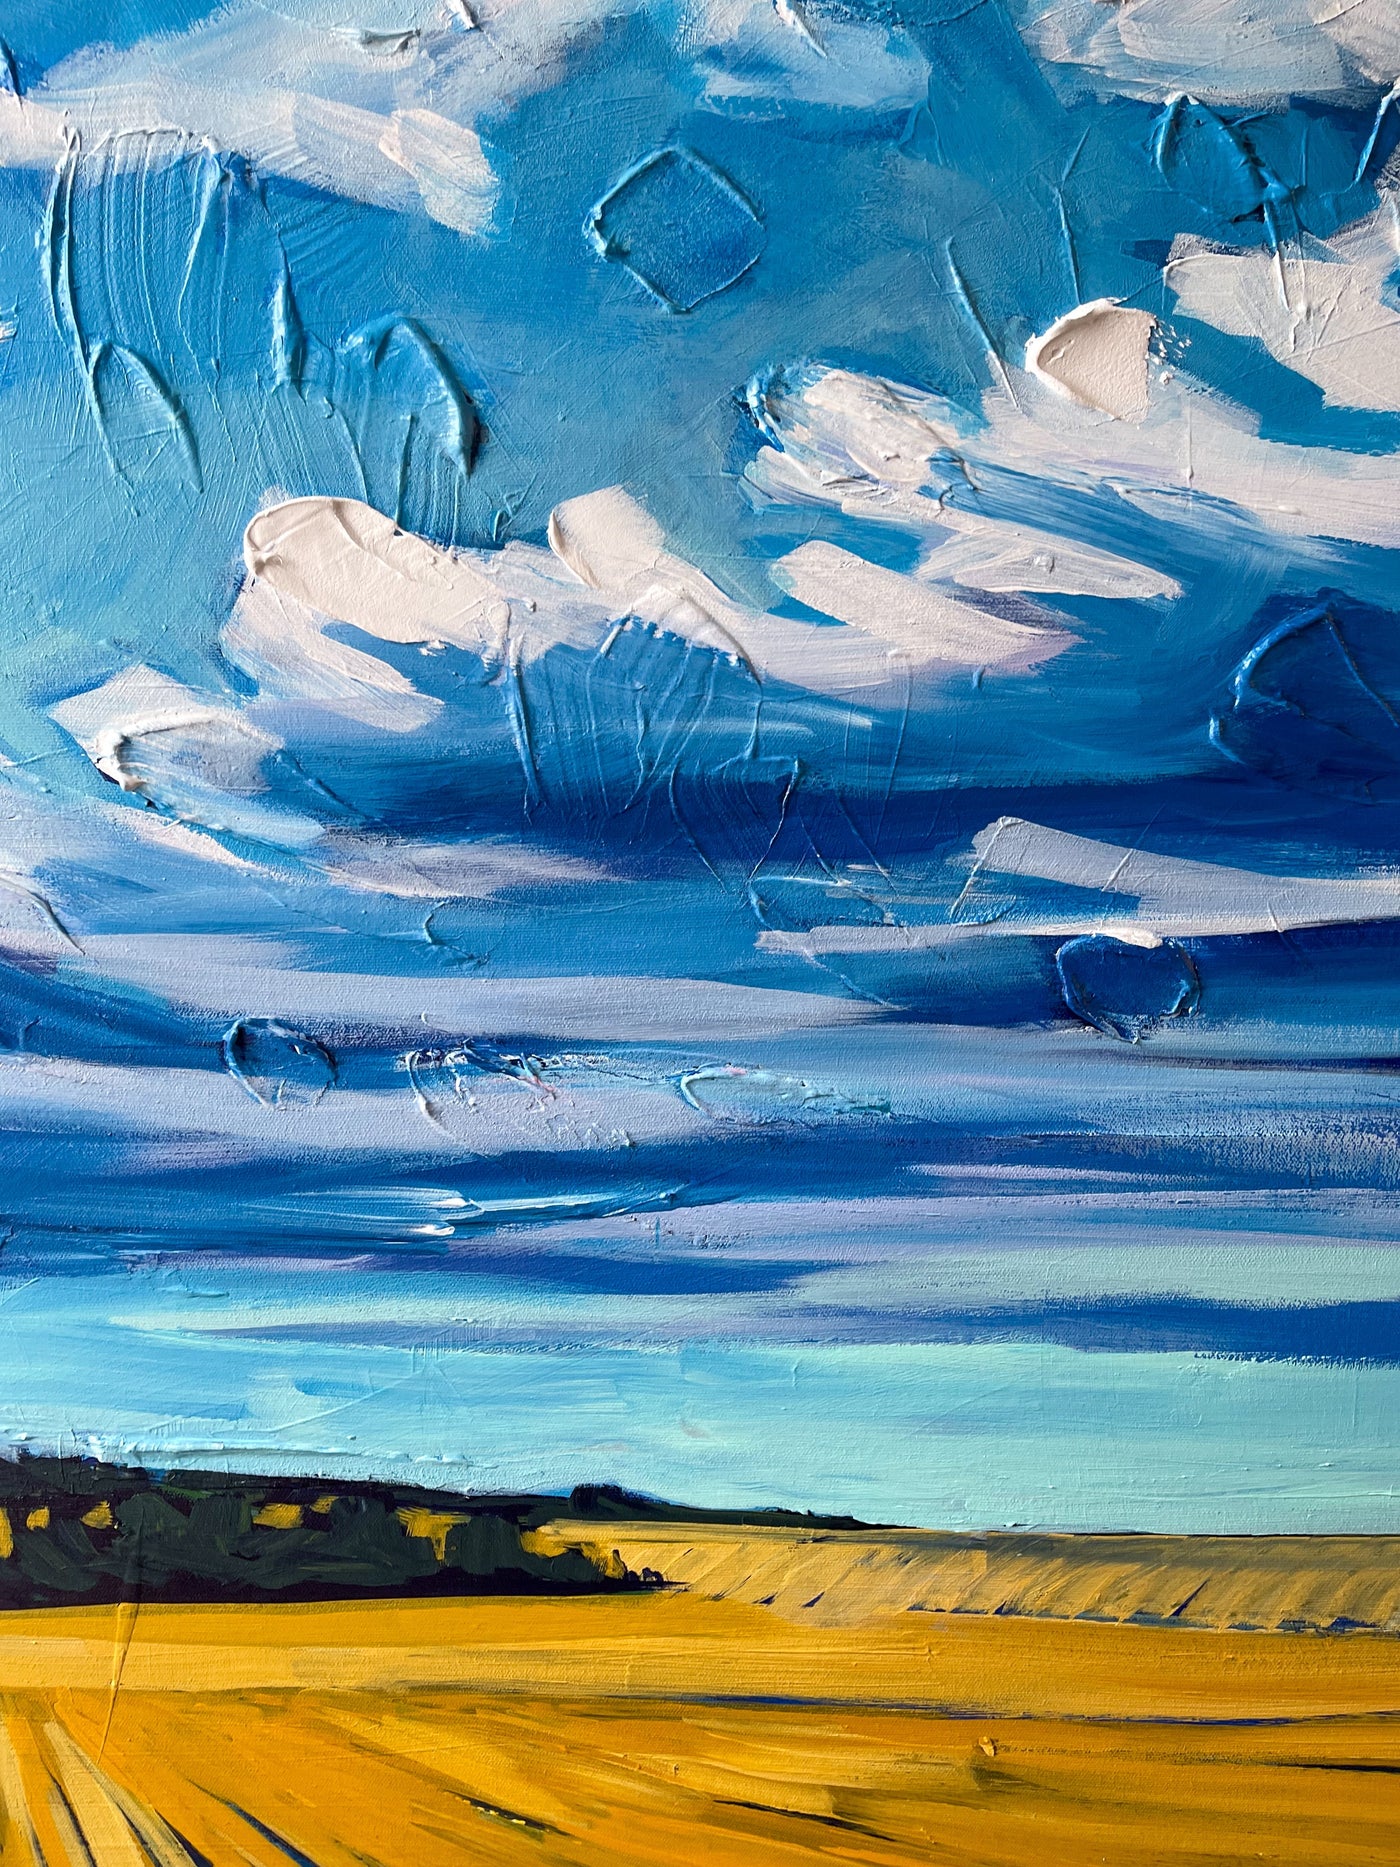 Breezy, 24x60 inches